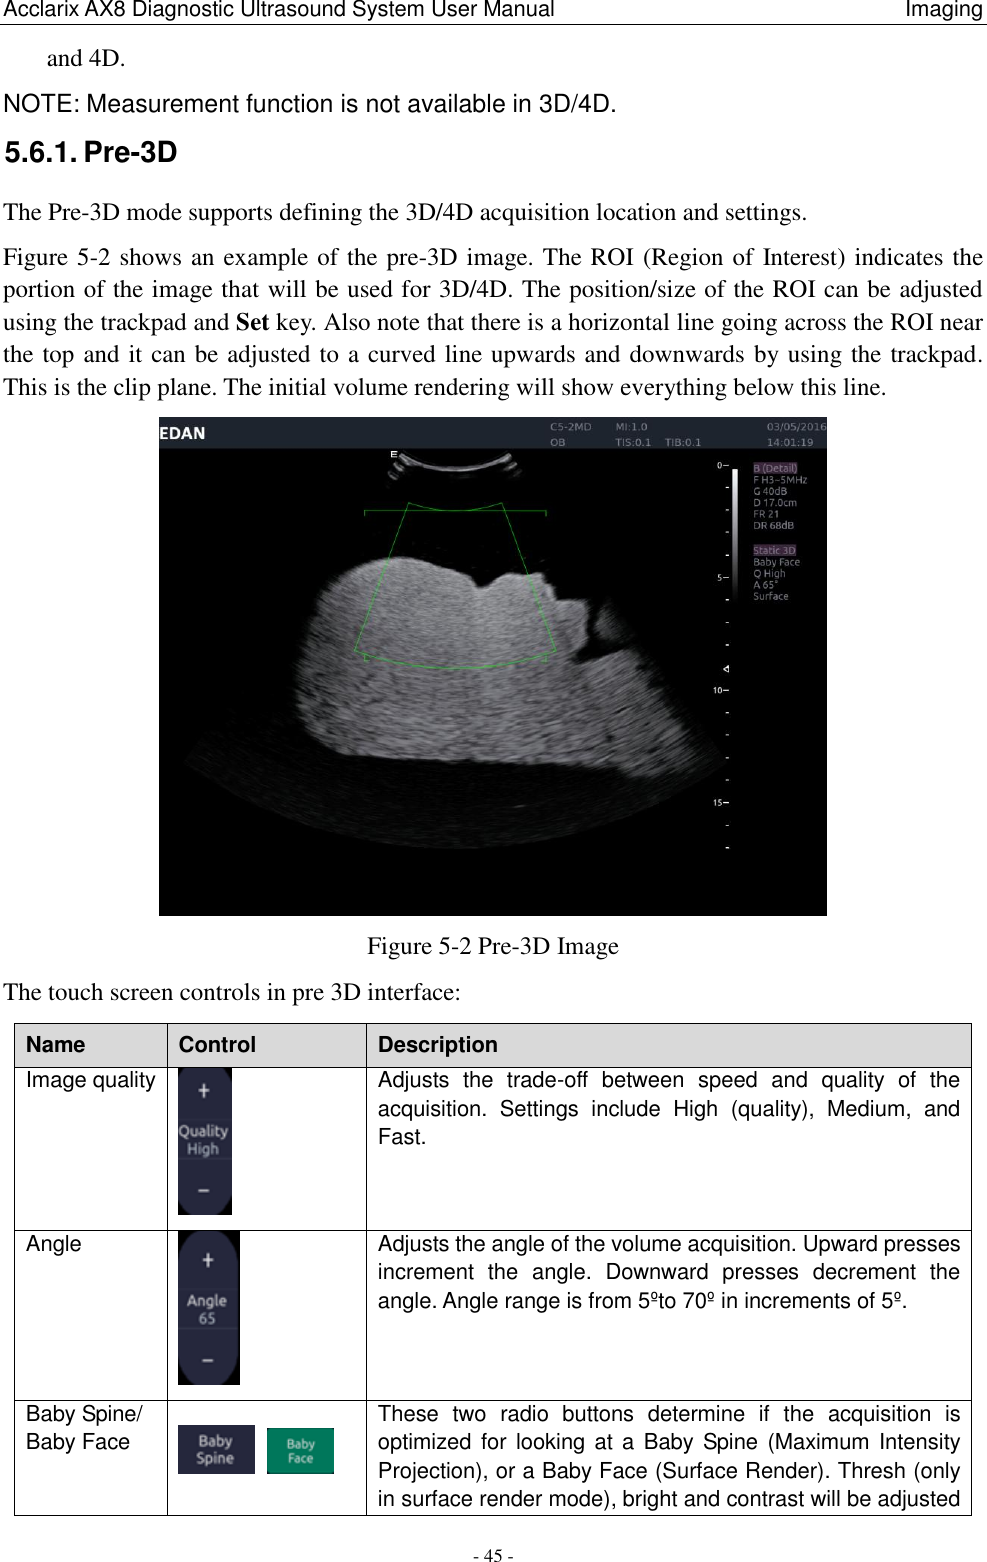 Acclarix AX8 Diagnostic Ultrasound System User Manual                                                                Imaging - 45 - and 4D. NOTE: Measurement function is not available in 3D/4D. 5.6.1. Pre-3D   The Pre-3D mode supports defining the 3D/4D acquisition location and settings. Figure 5-2 shows an example of the pre-3D image. The ROI (Region of Interest) indicates the portion of the image that will be used for 3D/4D. The position/size of the ROI can be adjusted using the trackpad and Set key. Also note that there is a horizontal line going across the ROI near the top and it can be adjusted to a curved line upwards and downwards by using the trackpad. This is the clip plane. The initial volume rendering will show everything below this line.    Figure 5-2 Pre-3D Image The touch screen controls in pre 3D interface: Name Control Description Image quality  Adjusts  the  trade-off  between  speed  and  quality  of  the acquisition.  Settings  include  High  (quality),  Medium,  and Fast. Angle  Adjusts the angle of the volume acquisition. Upward presses increment  the  angle.  Downward  presses  decrement  the angle. Angle range is from 5ºto 70º in increments of 5º.   Baby Spine/   Baby Face   These  two  radio  buttons  determine  if  the  acquisition  is optimized for  looking at a  Baby Spine (Maximum Intensity Projection), or a Baby Face (Surface Render). Thresh (only in surface render mode), bright and contrast will be adjusted 